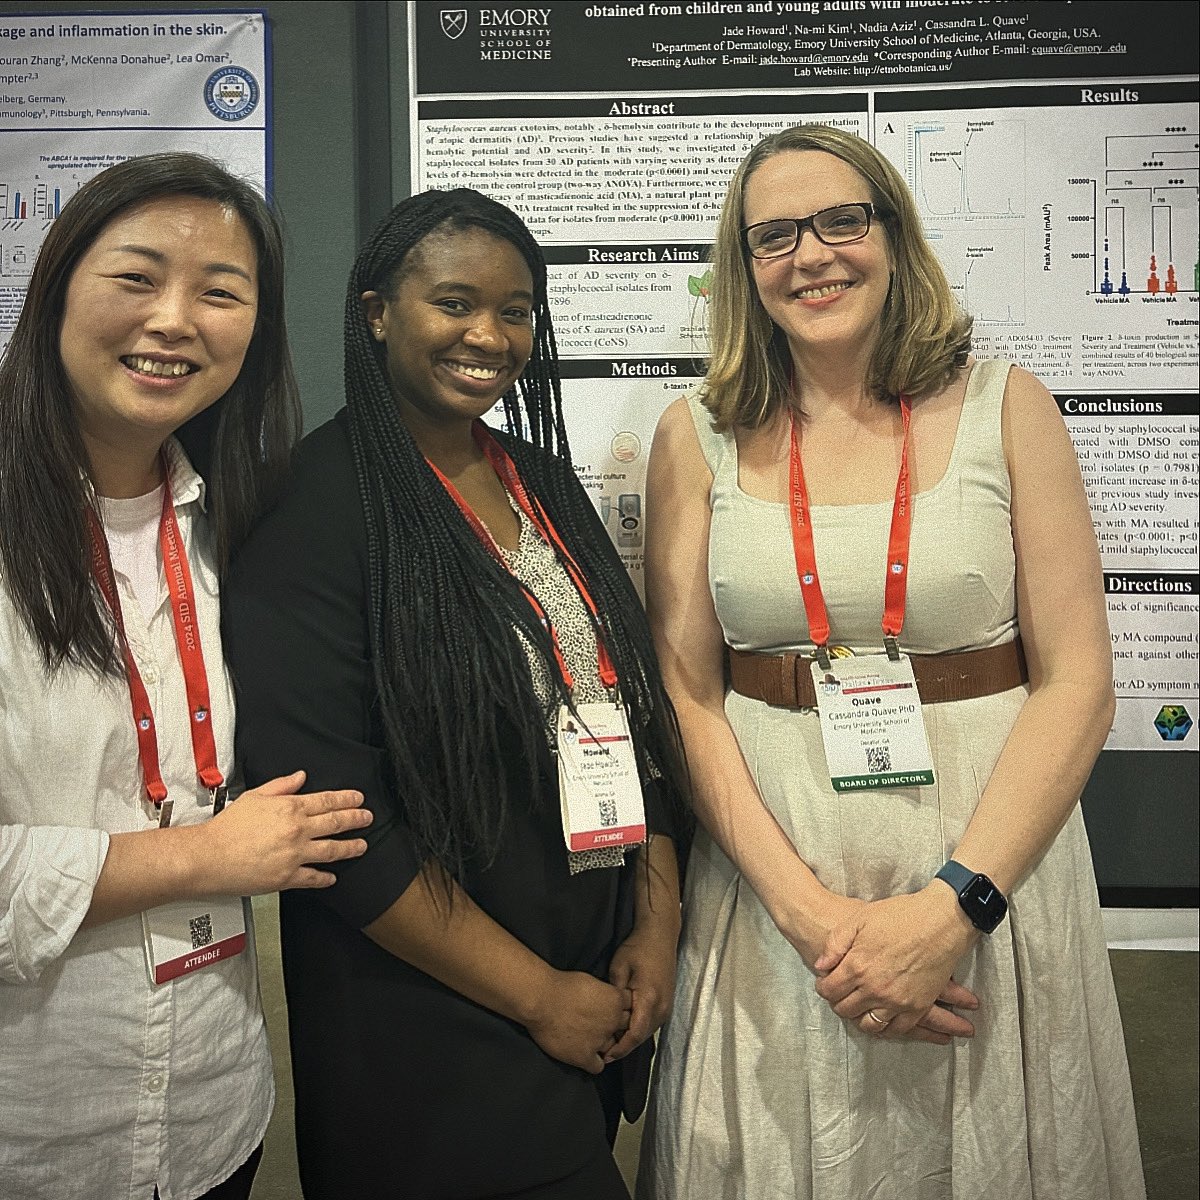 So proud of my talented #QuaveLab team on their awesome poster presentation today at the Society for Investigative Dermatology conference in Dallas today! Way to go Jade and Na-mi!! #eczema #dermatology #microbiome #drugdiscovery #emory